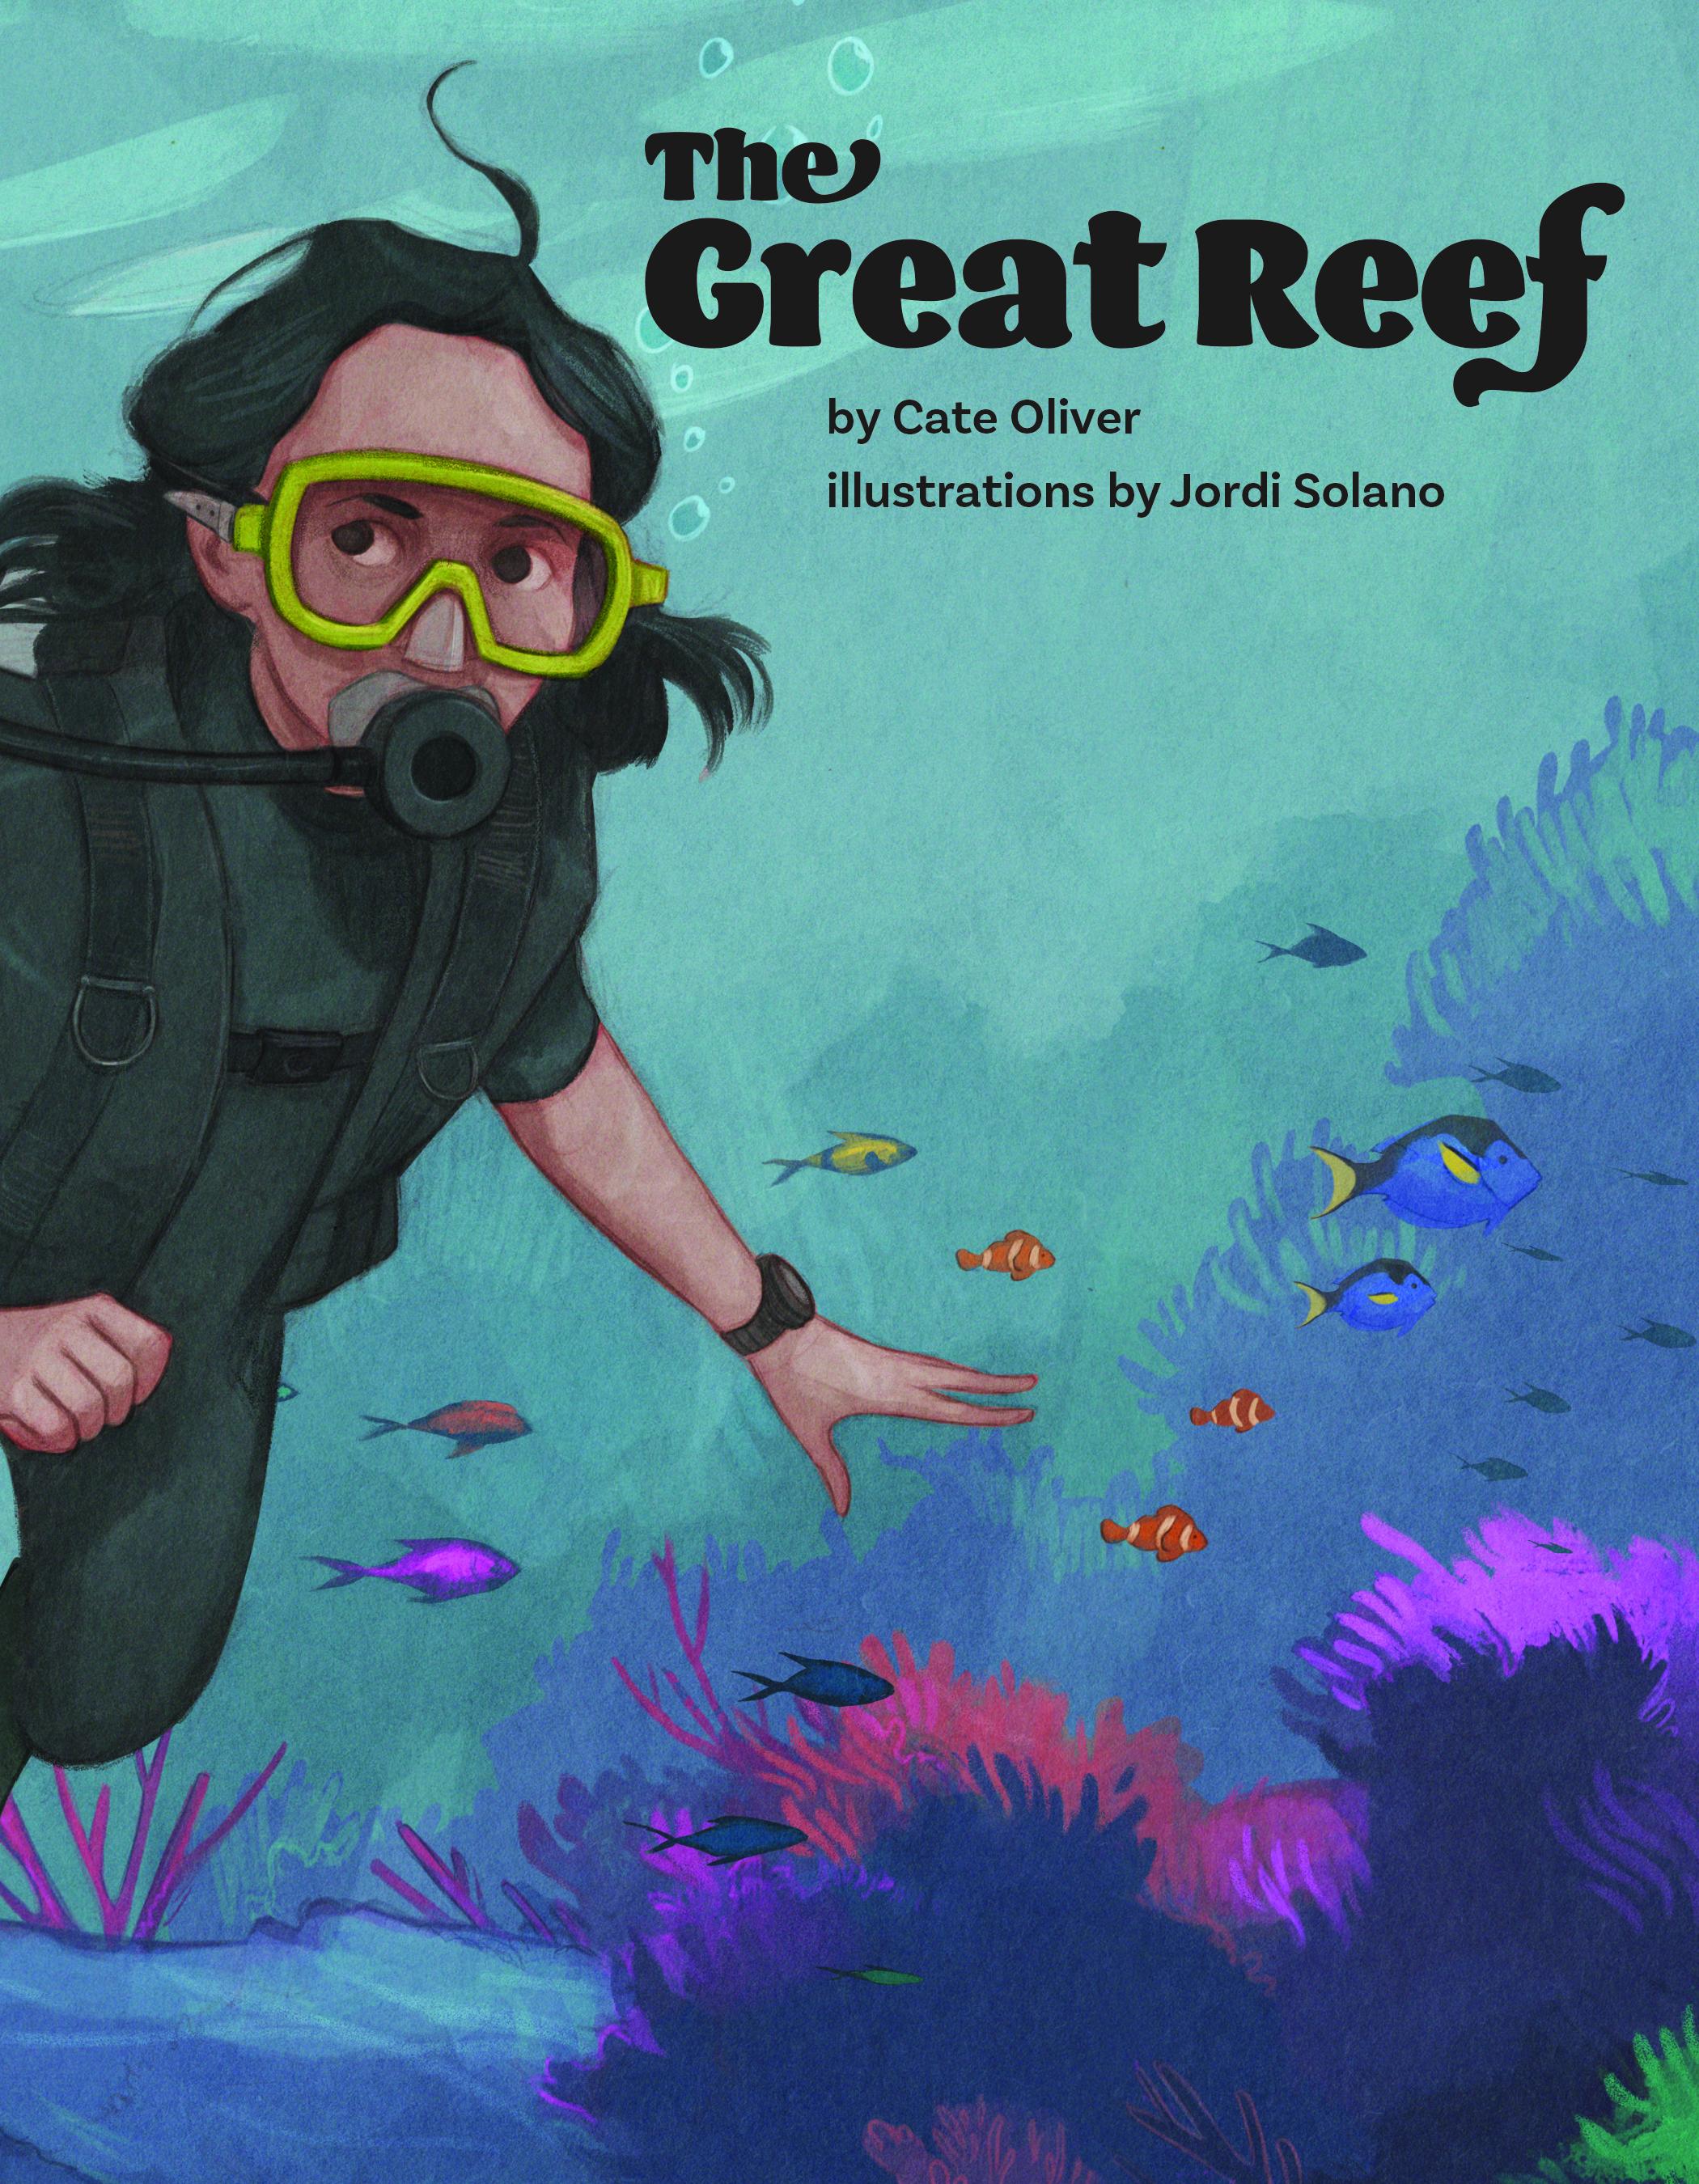 The Great Reef